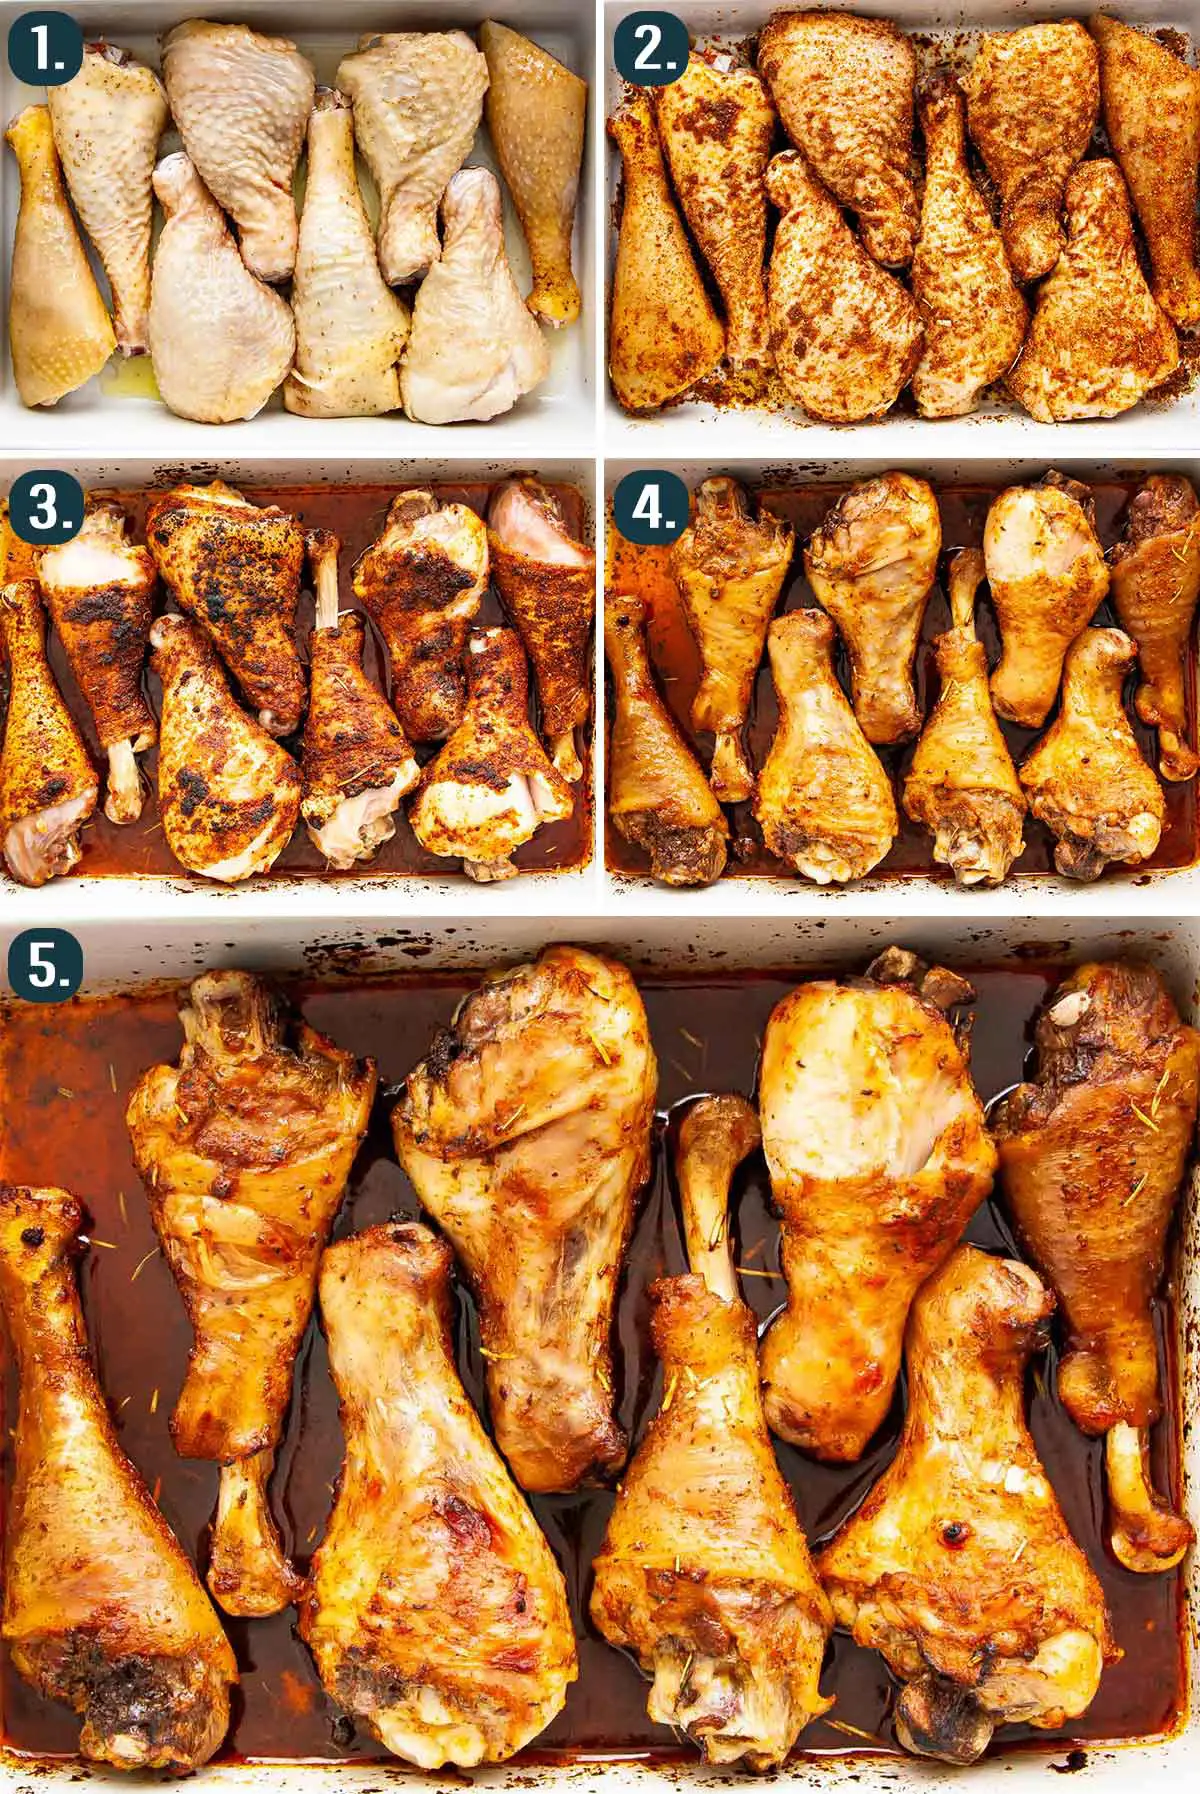 process shots showing how to make baked chicken drumsticks.